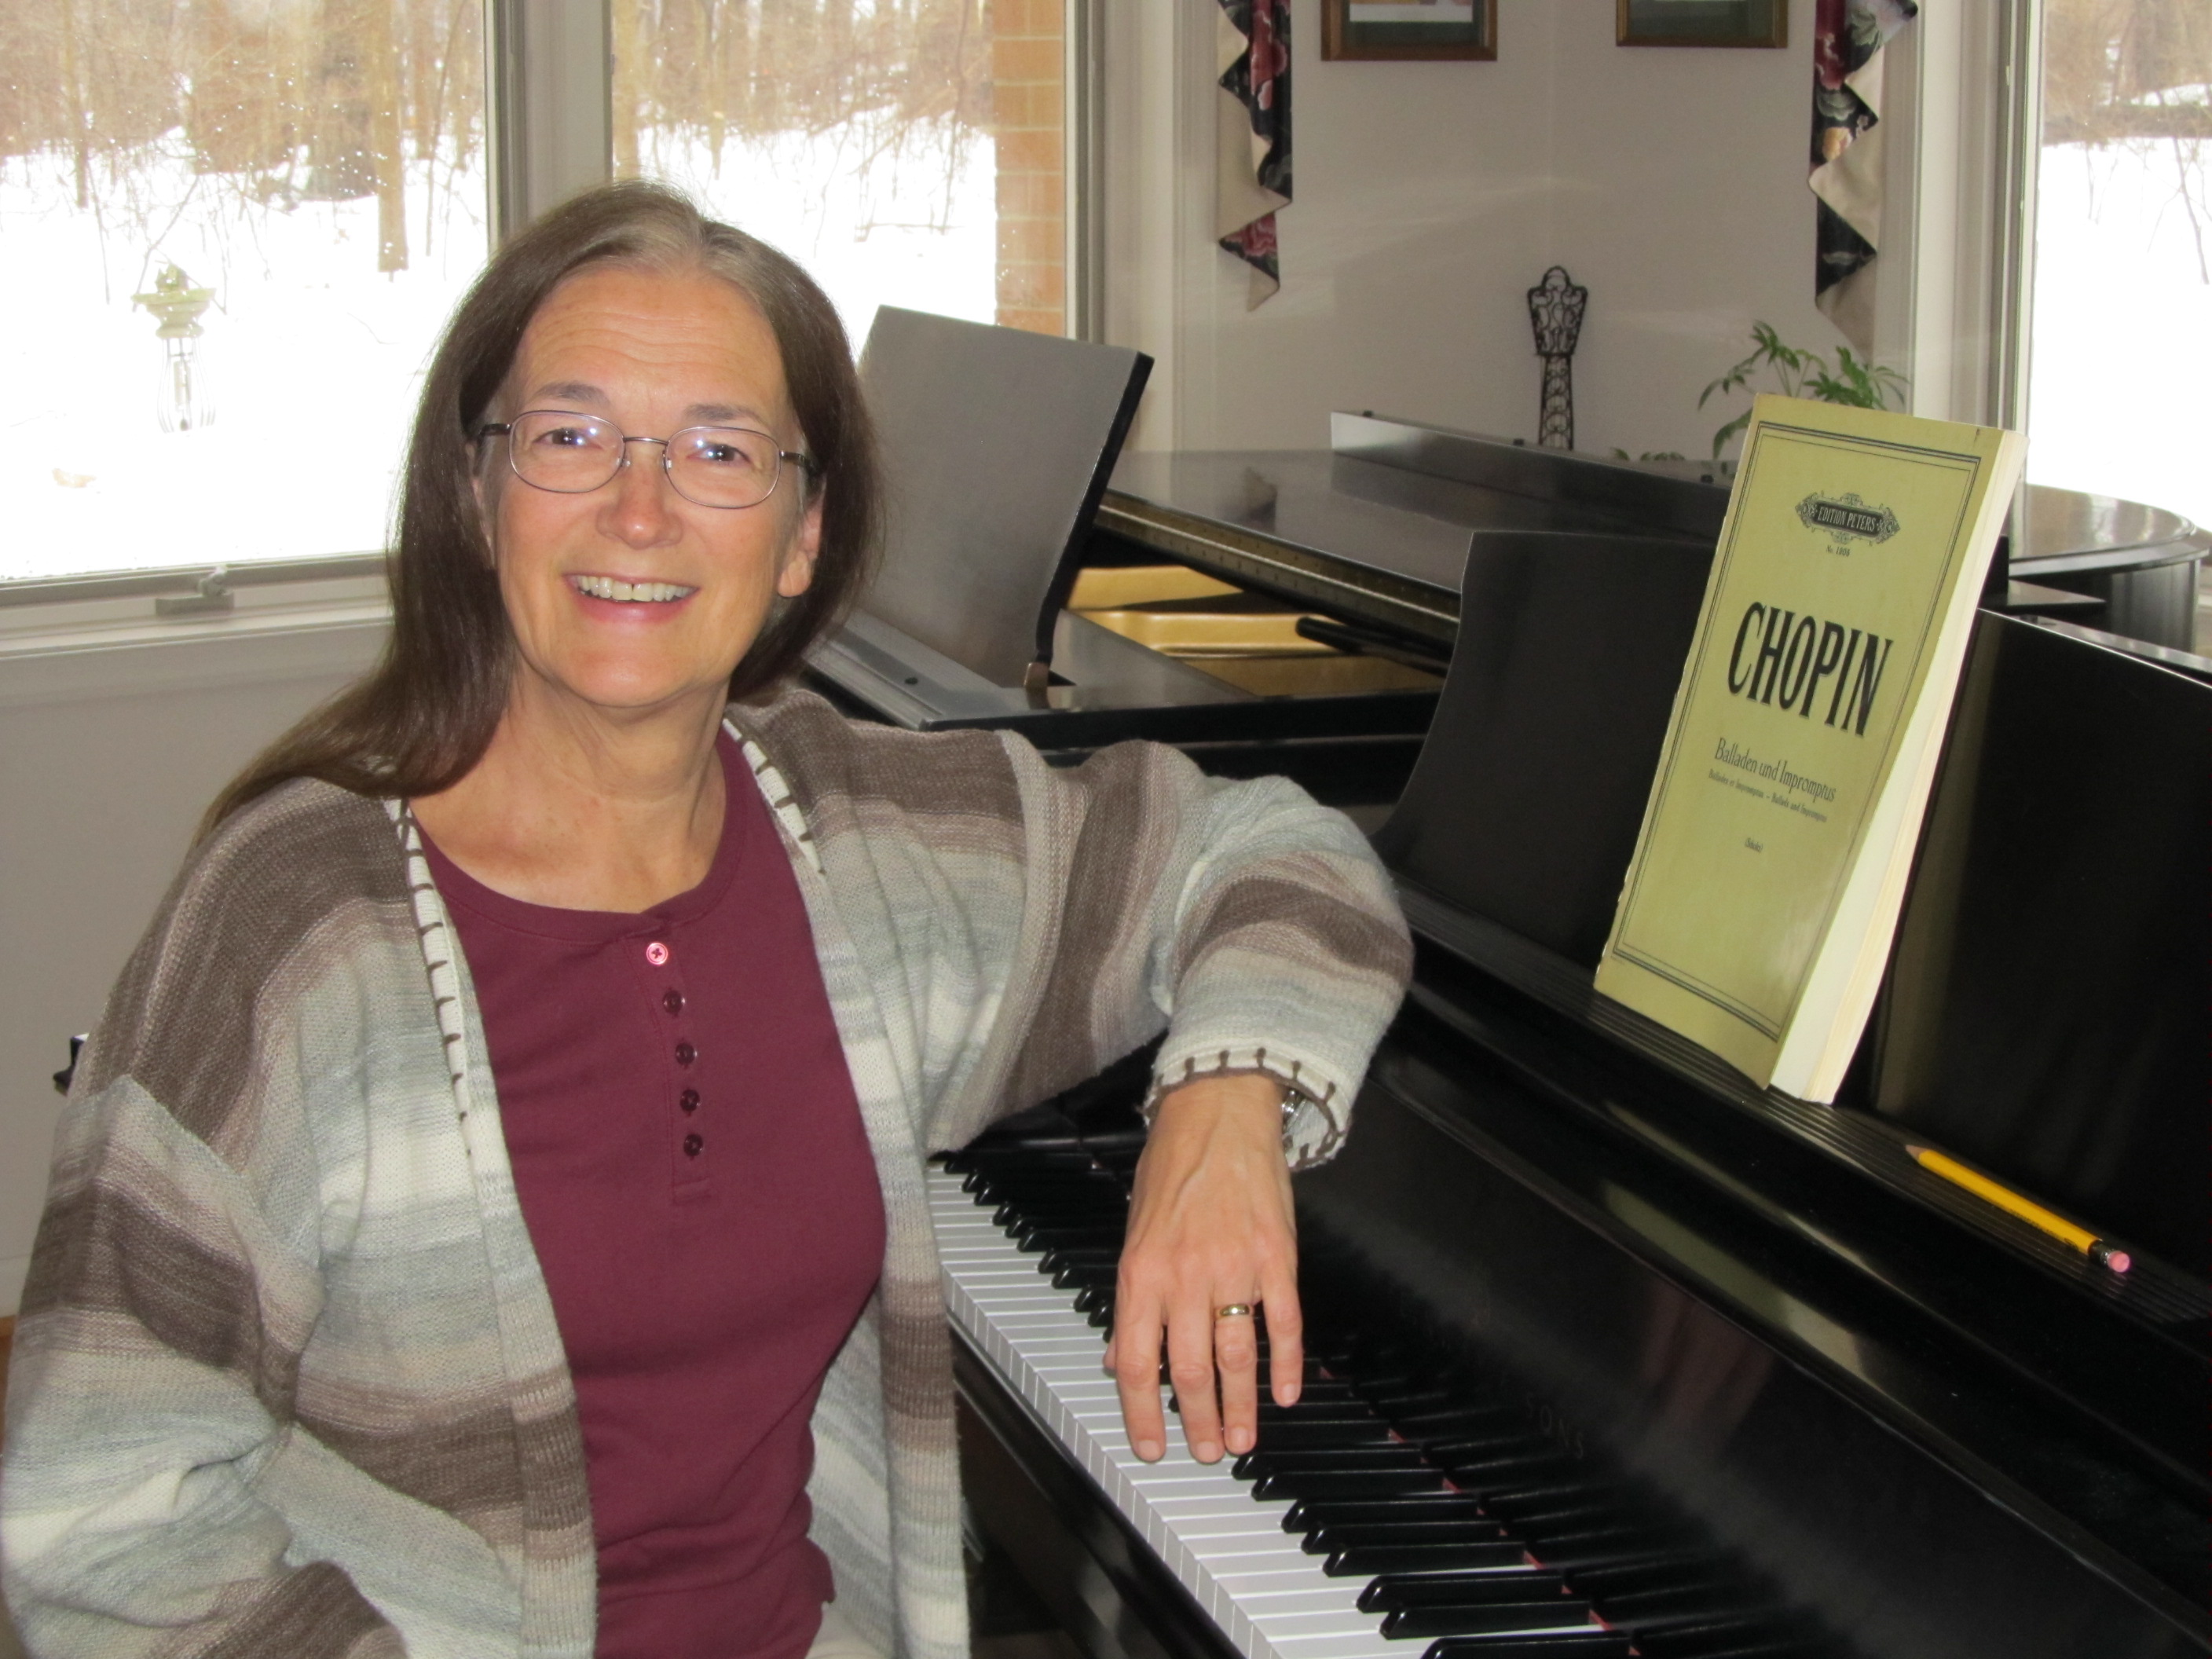 Donna sits at a piano in the studio